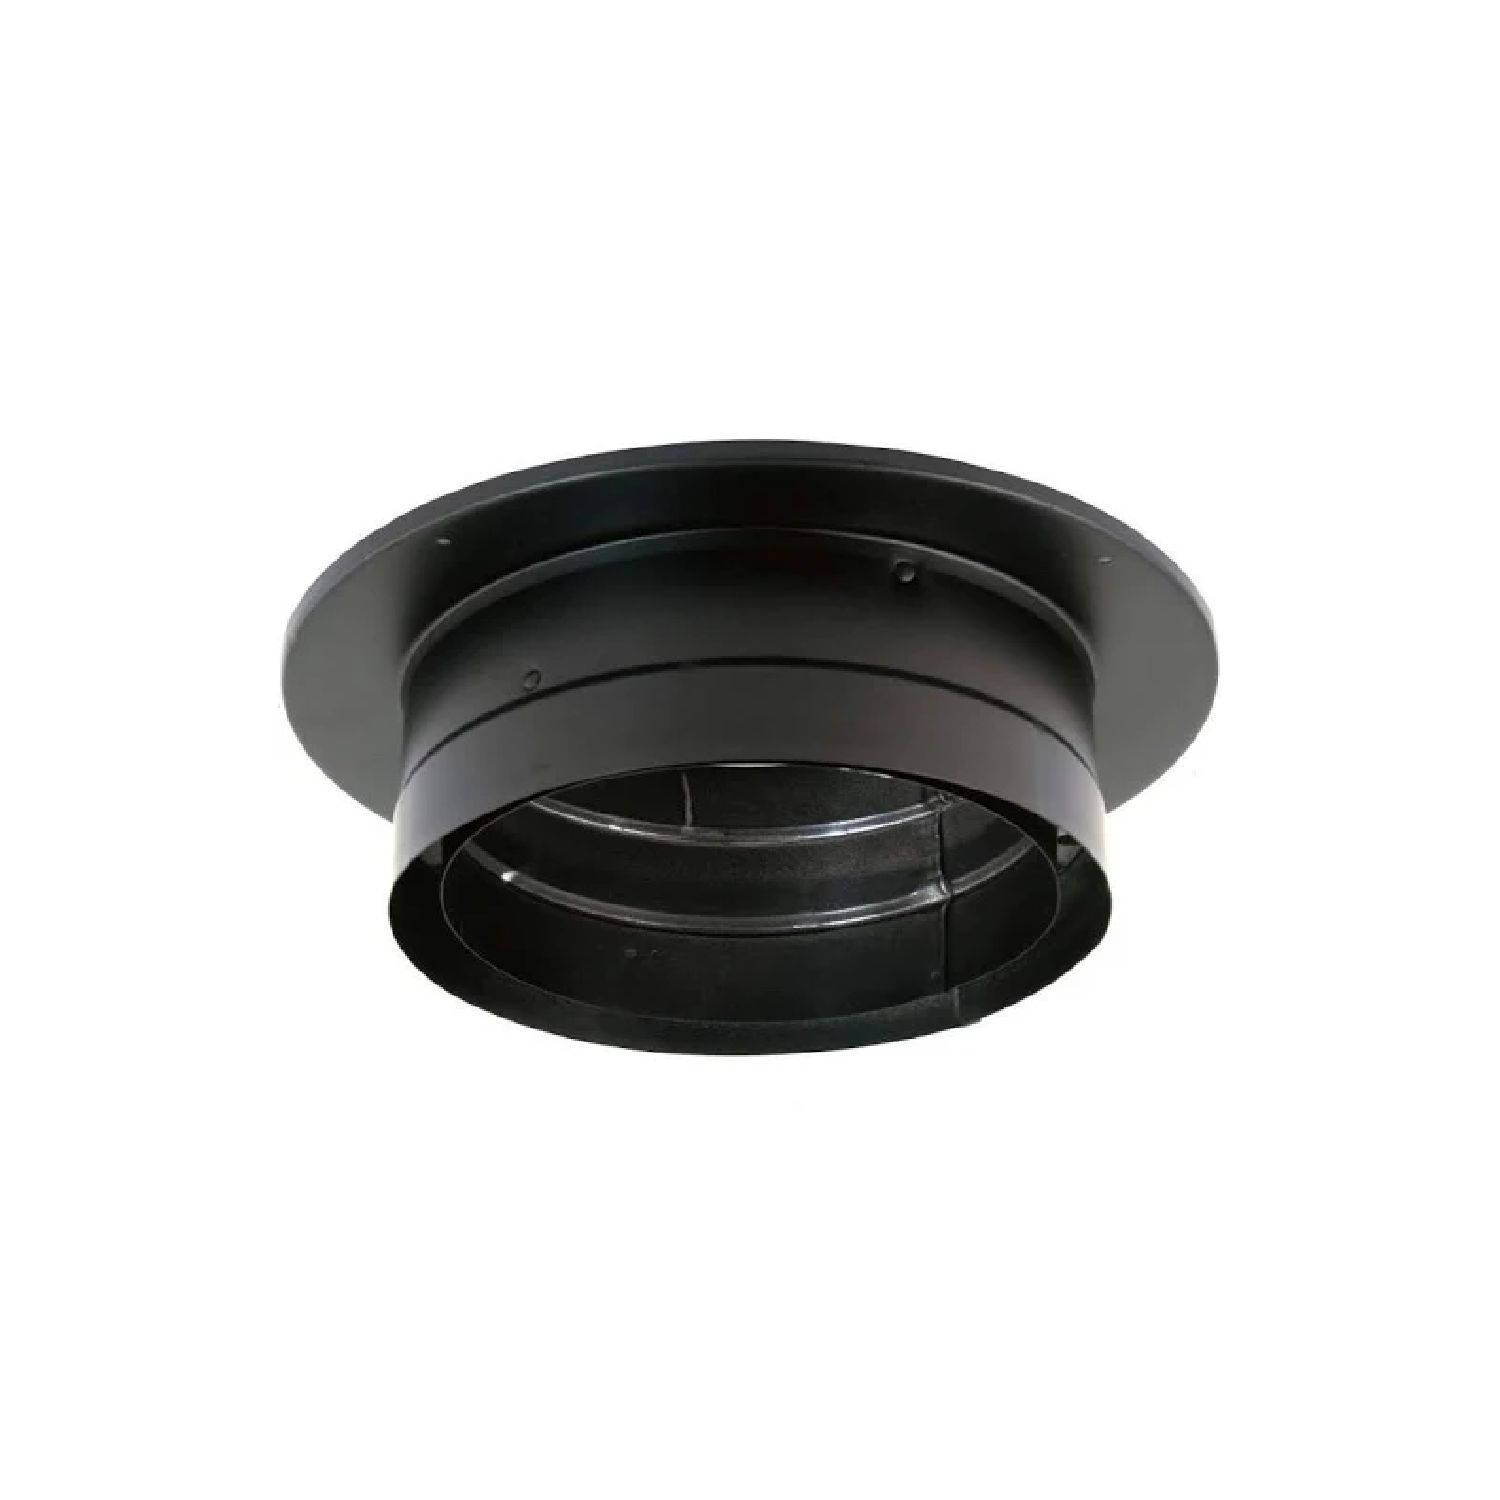 DuraVent 6DVL-06 DVL 6-Inch Double-Wall Black Pipe